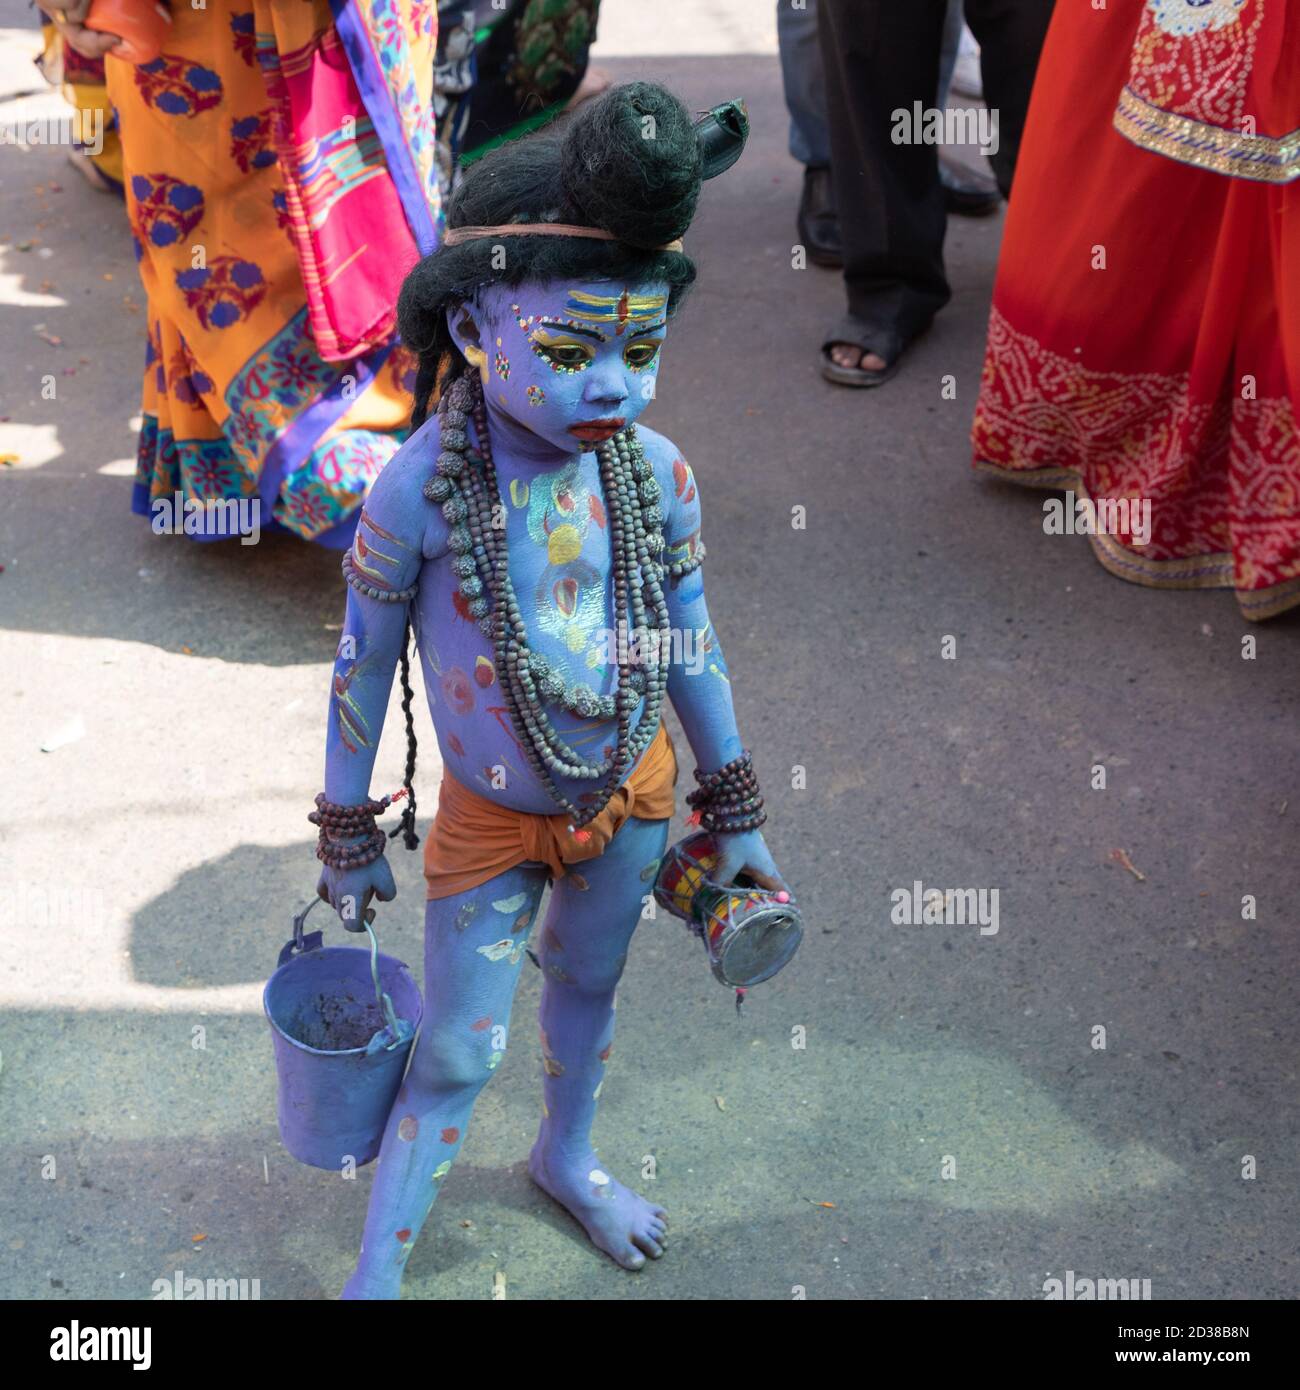 A little boy with his body painted blue to depict hinhu god Shive on the streets of Pushkar, Rajasthan, India on 28 October 2017 Stock Photo